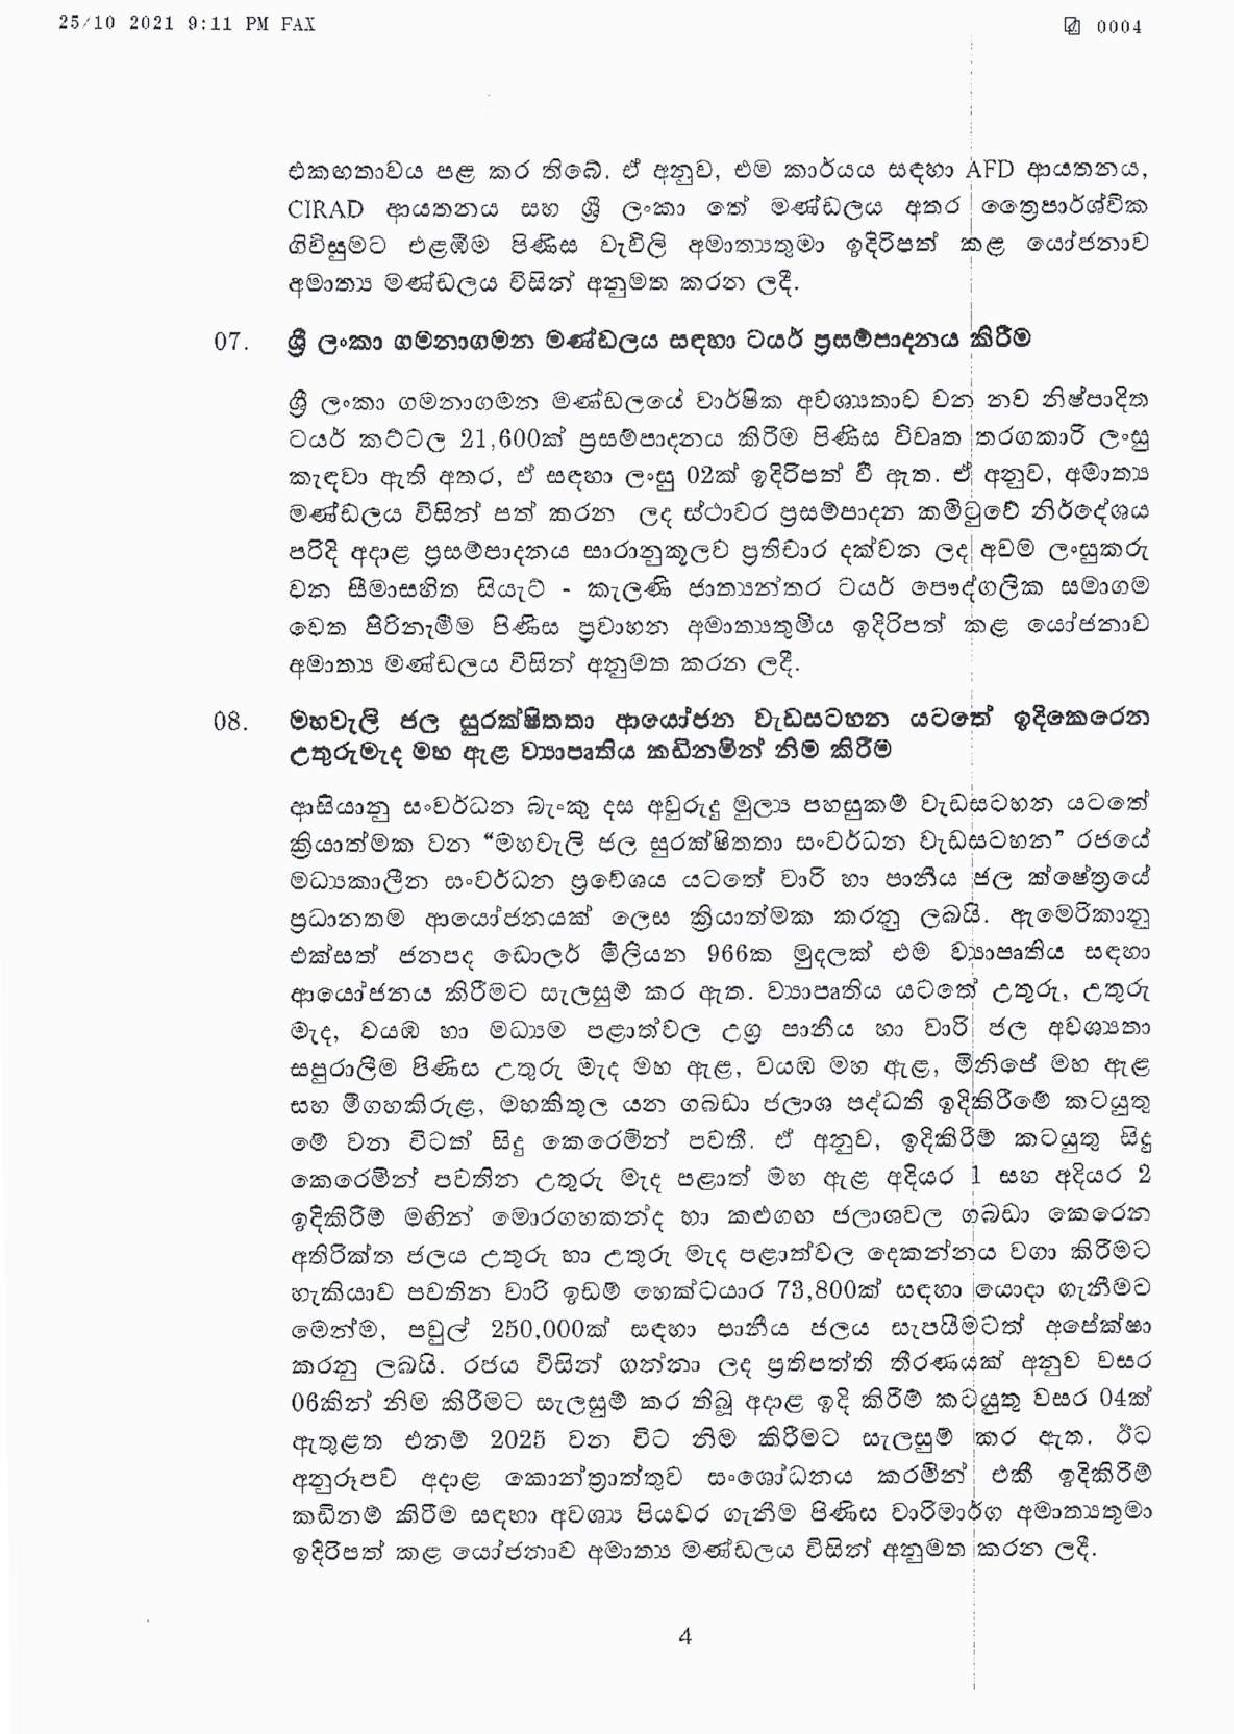 Cabinet Decisions on 25.10.2021 page 004